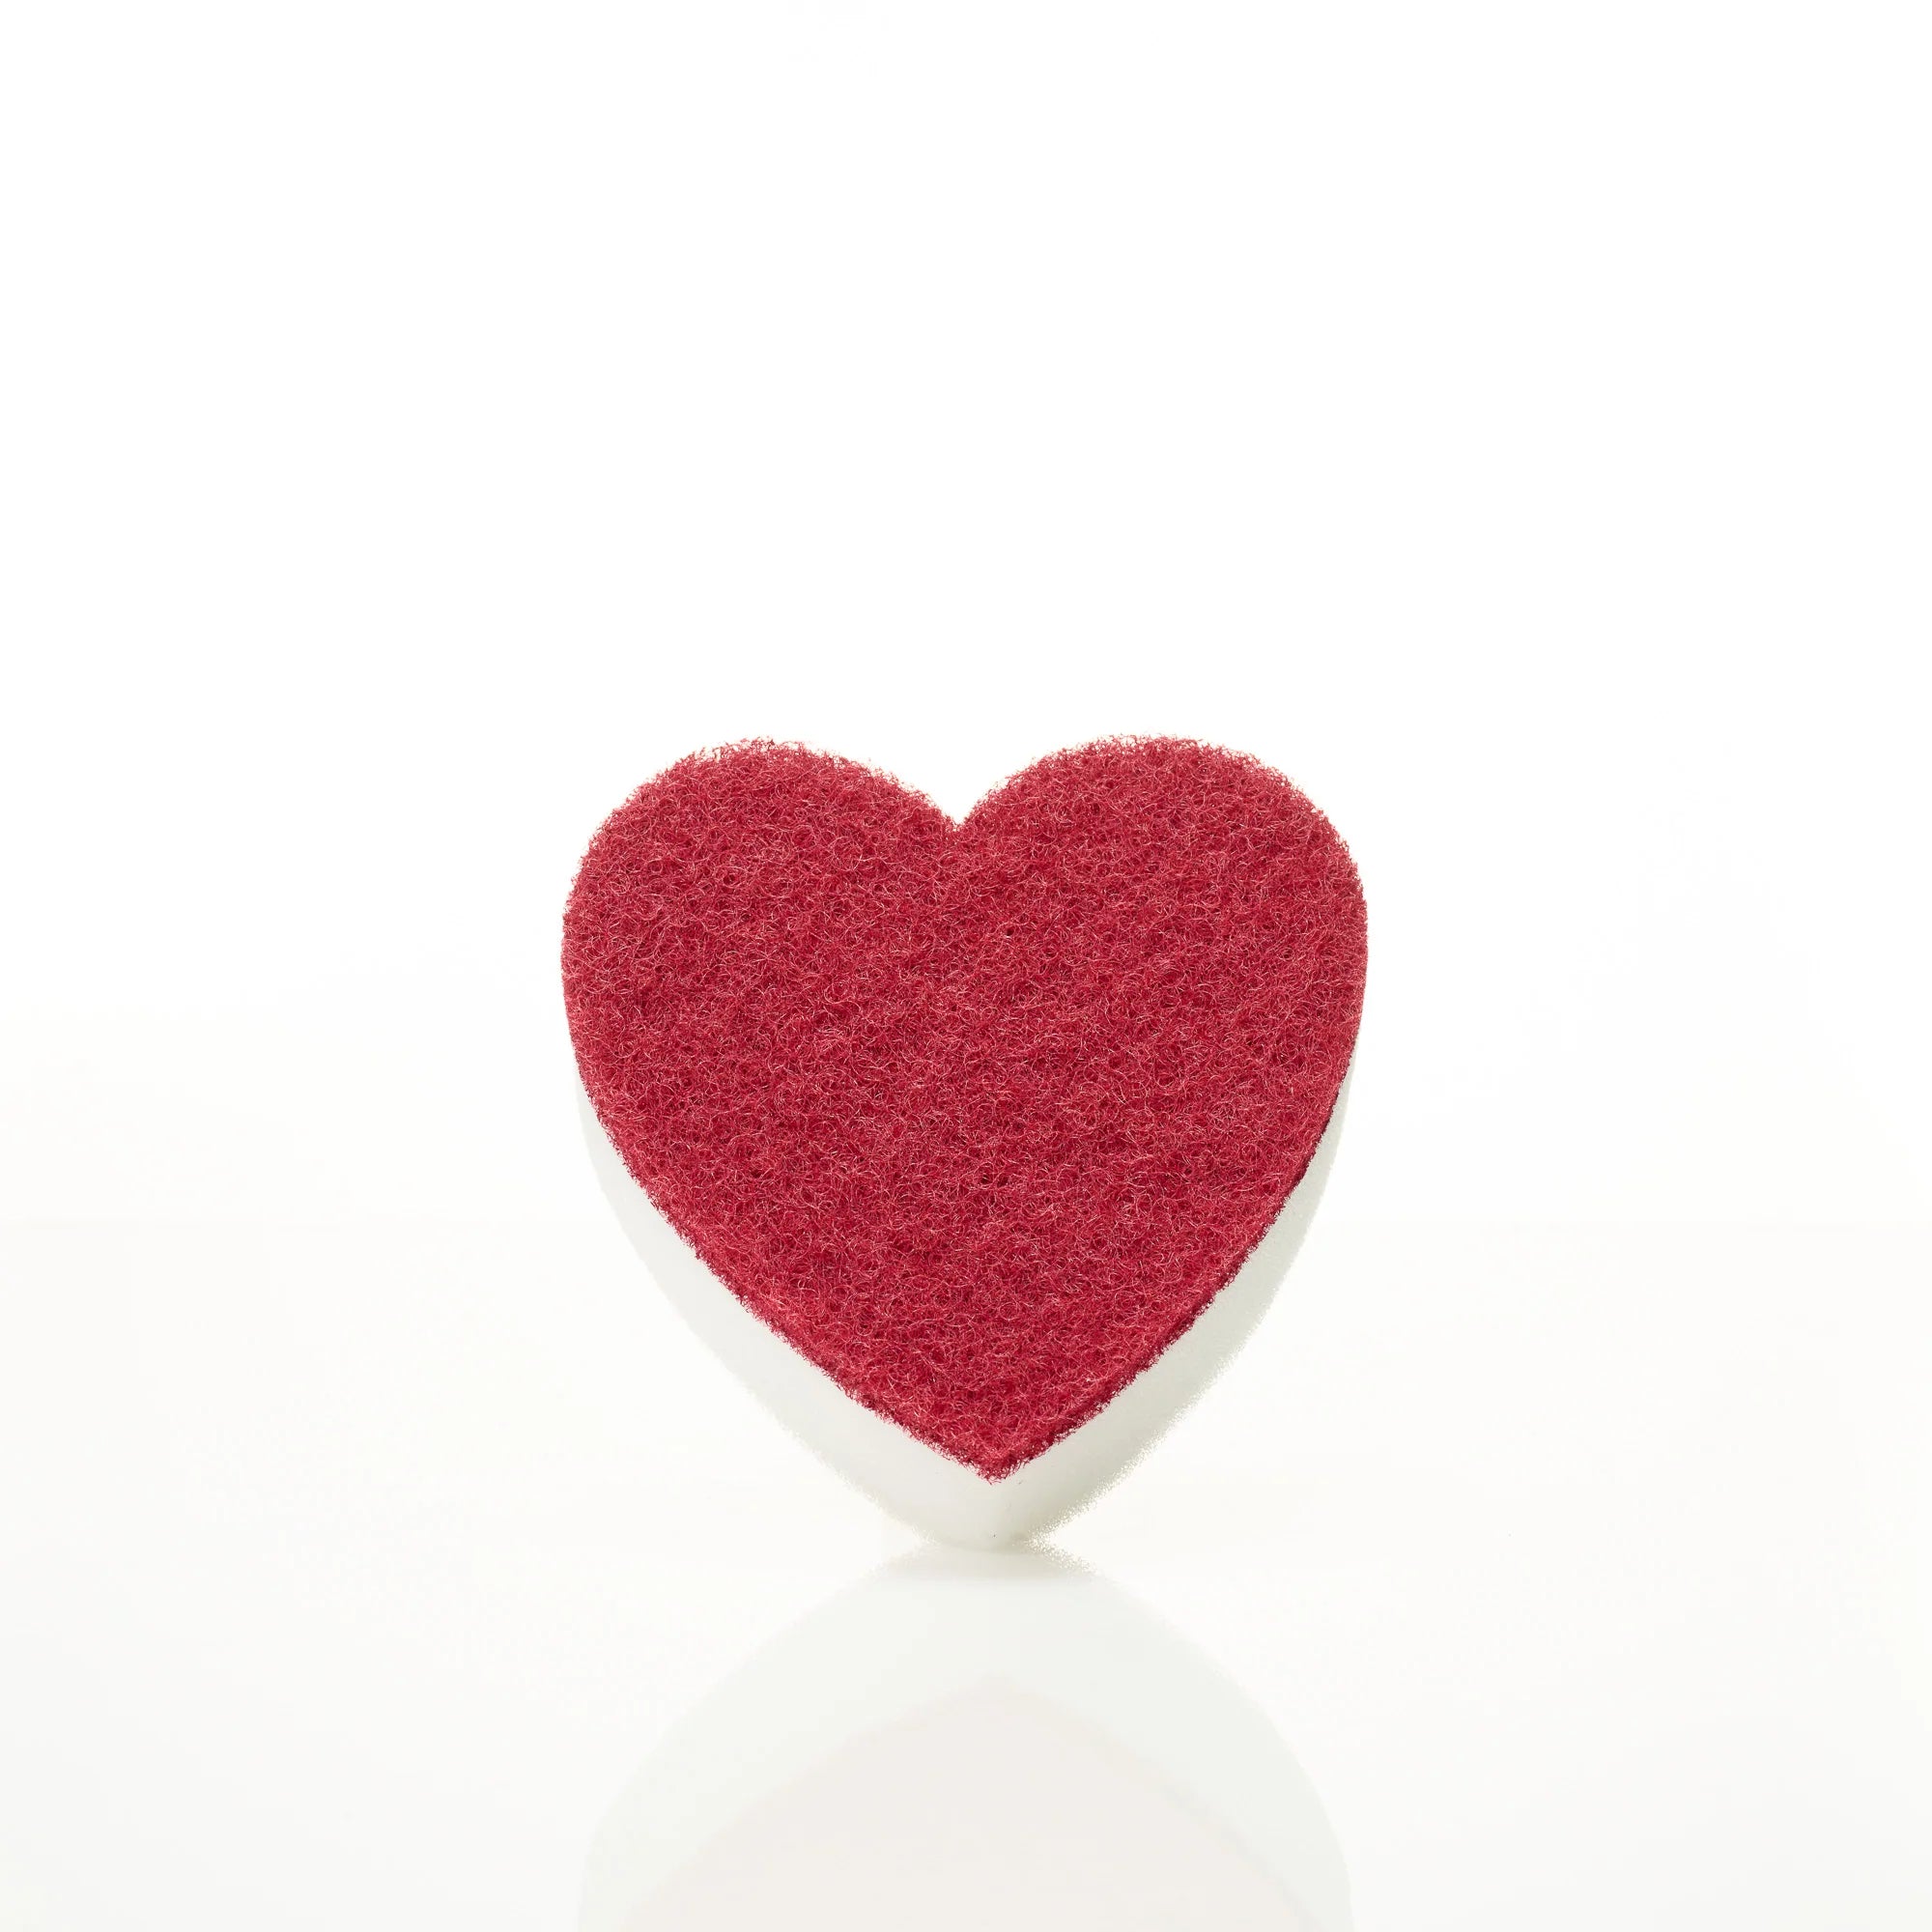 Frenchic Paint | Frenchic Heart Sponge by Weirs of Baggot St